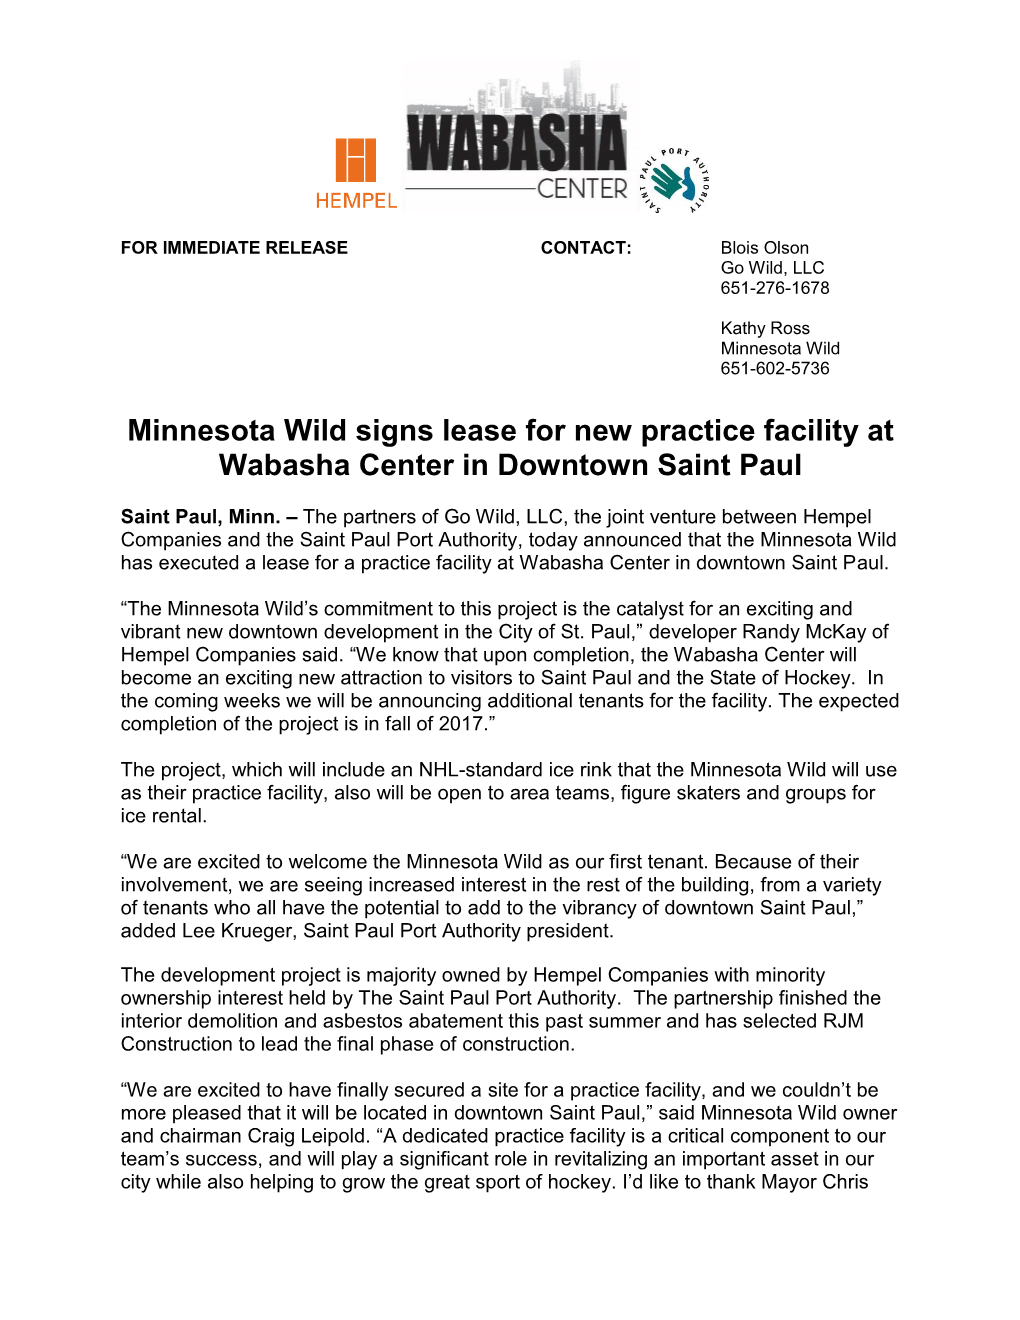 Minnesota Wild Signs Lease for New Practice Facility at Wabasha Center in Downtown Saint Paul